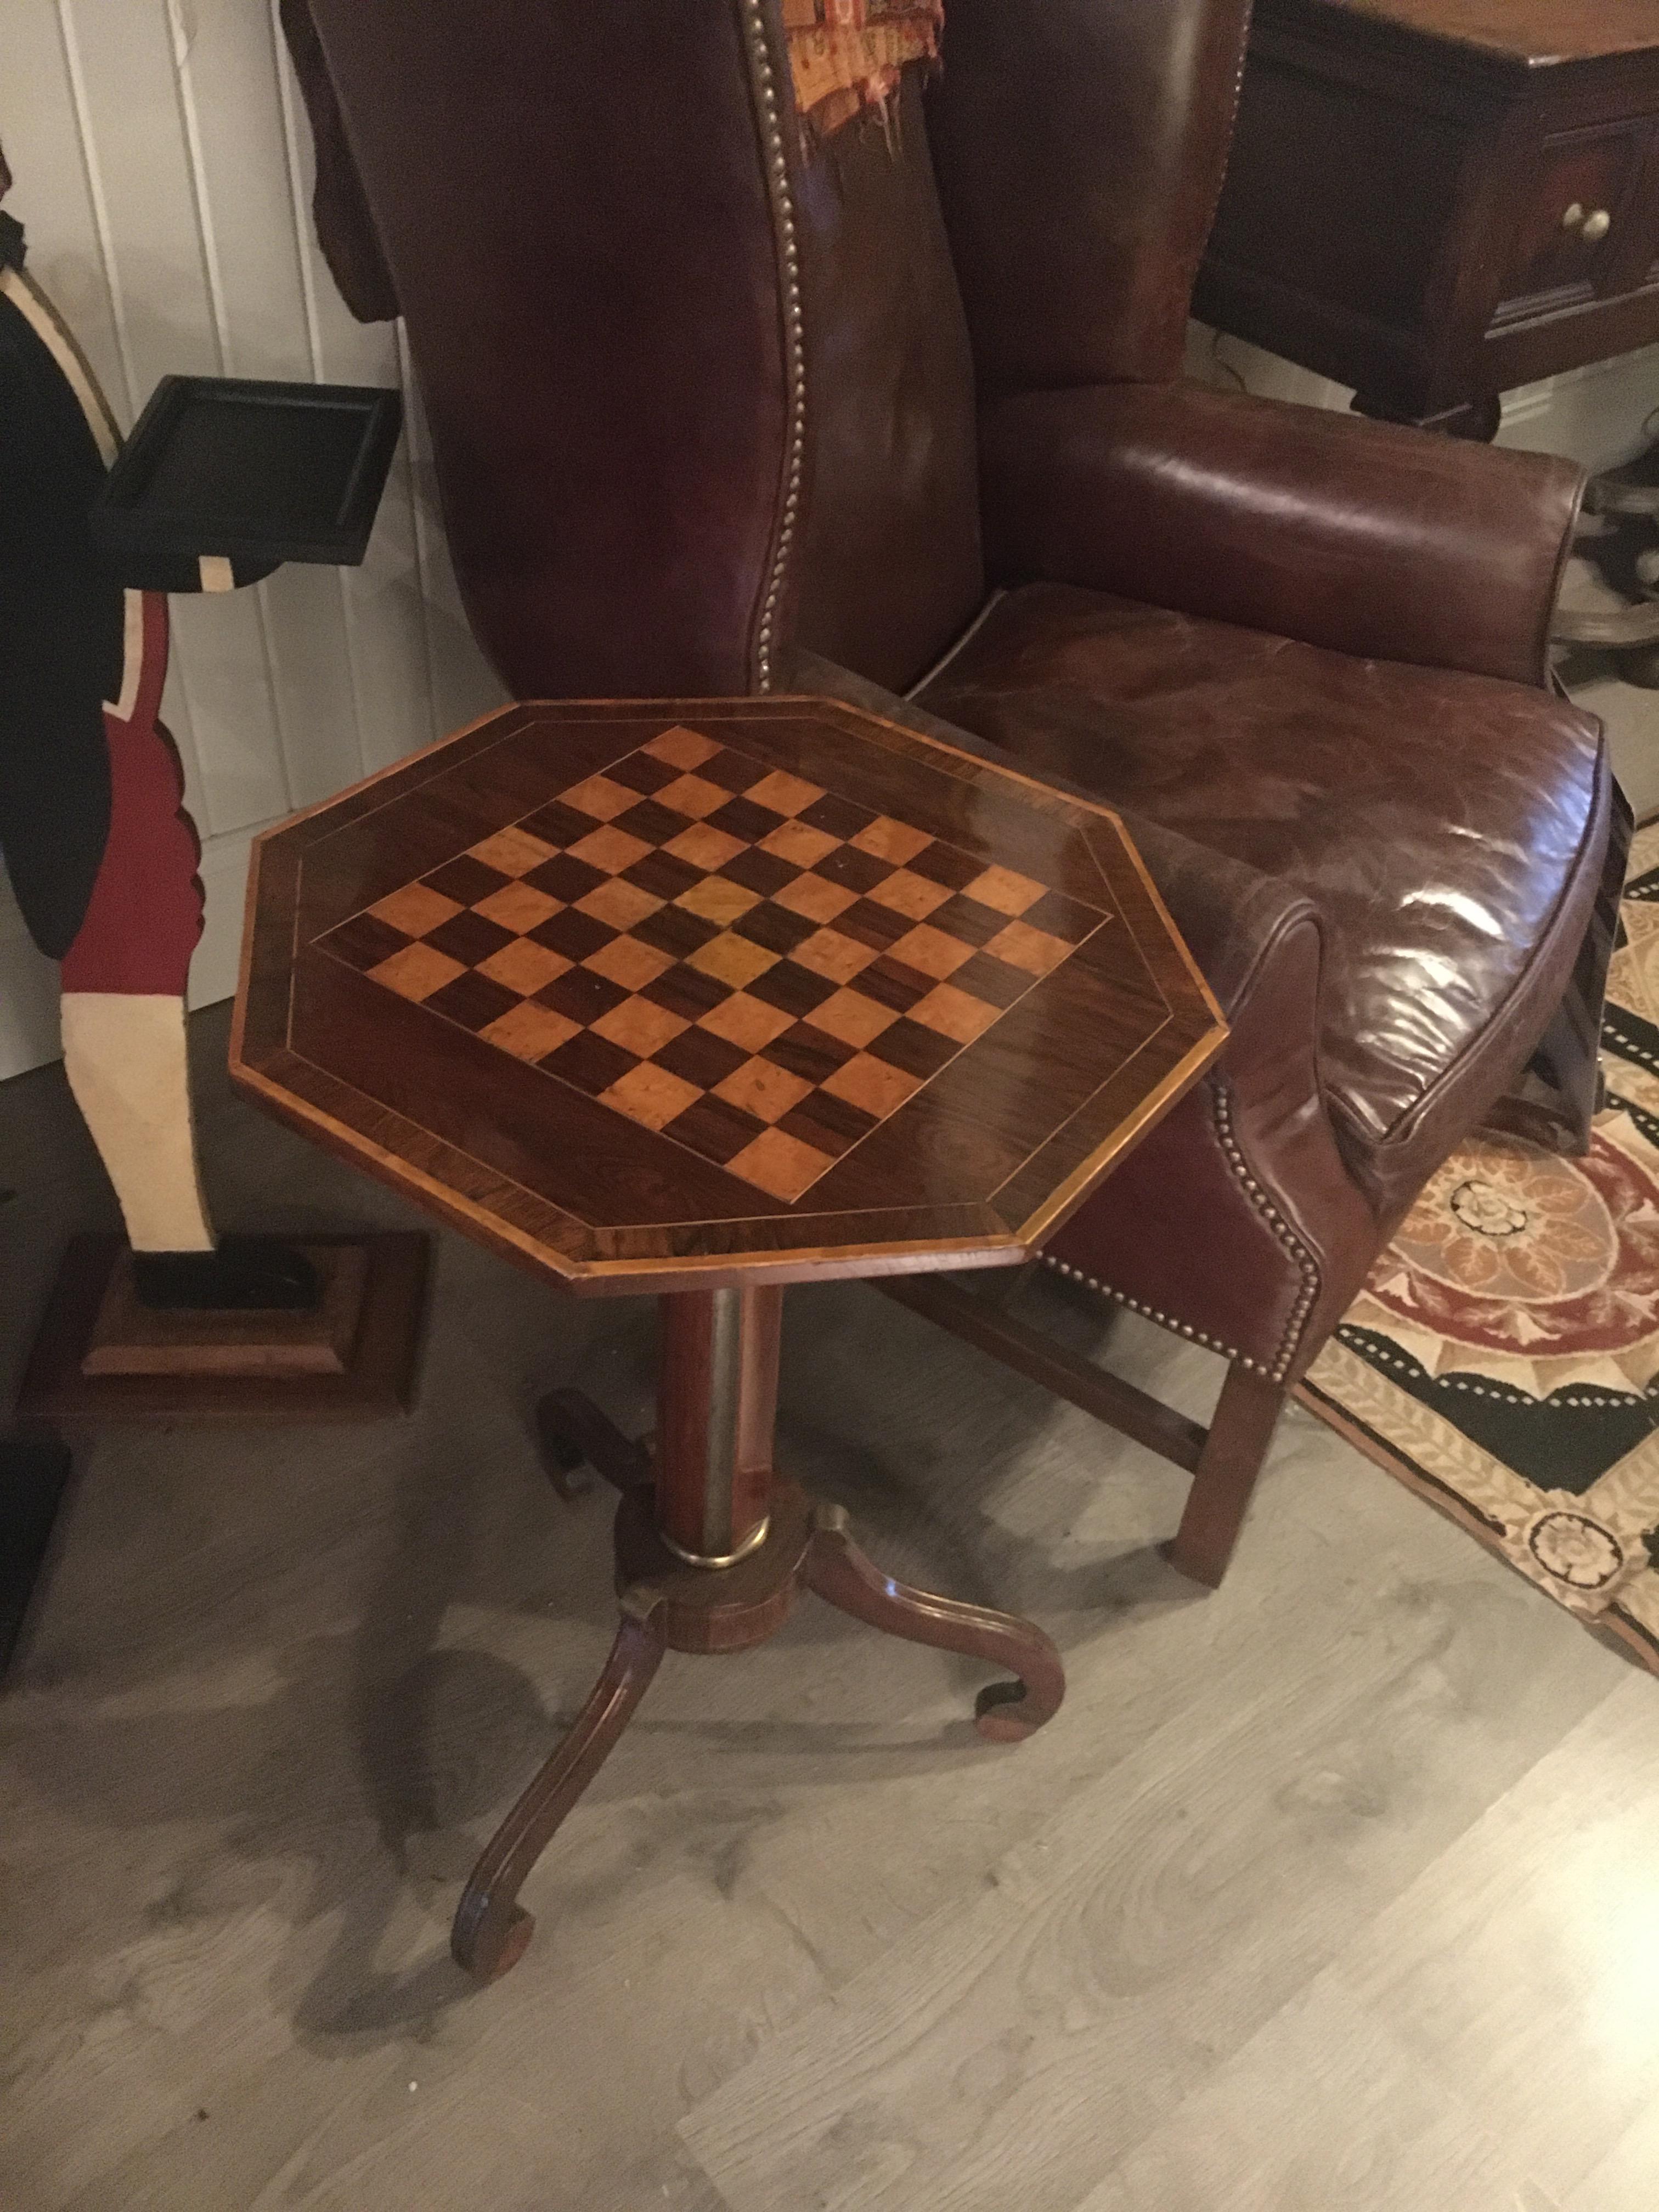 Regency Exceptional Russian Parquetry Inlaid Chess Table with Gilt Mounts.  Great color. For Sale